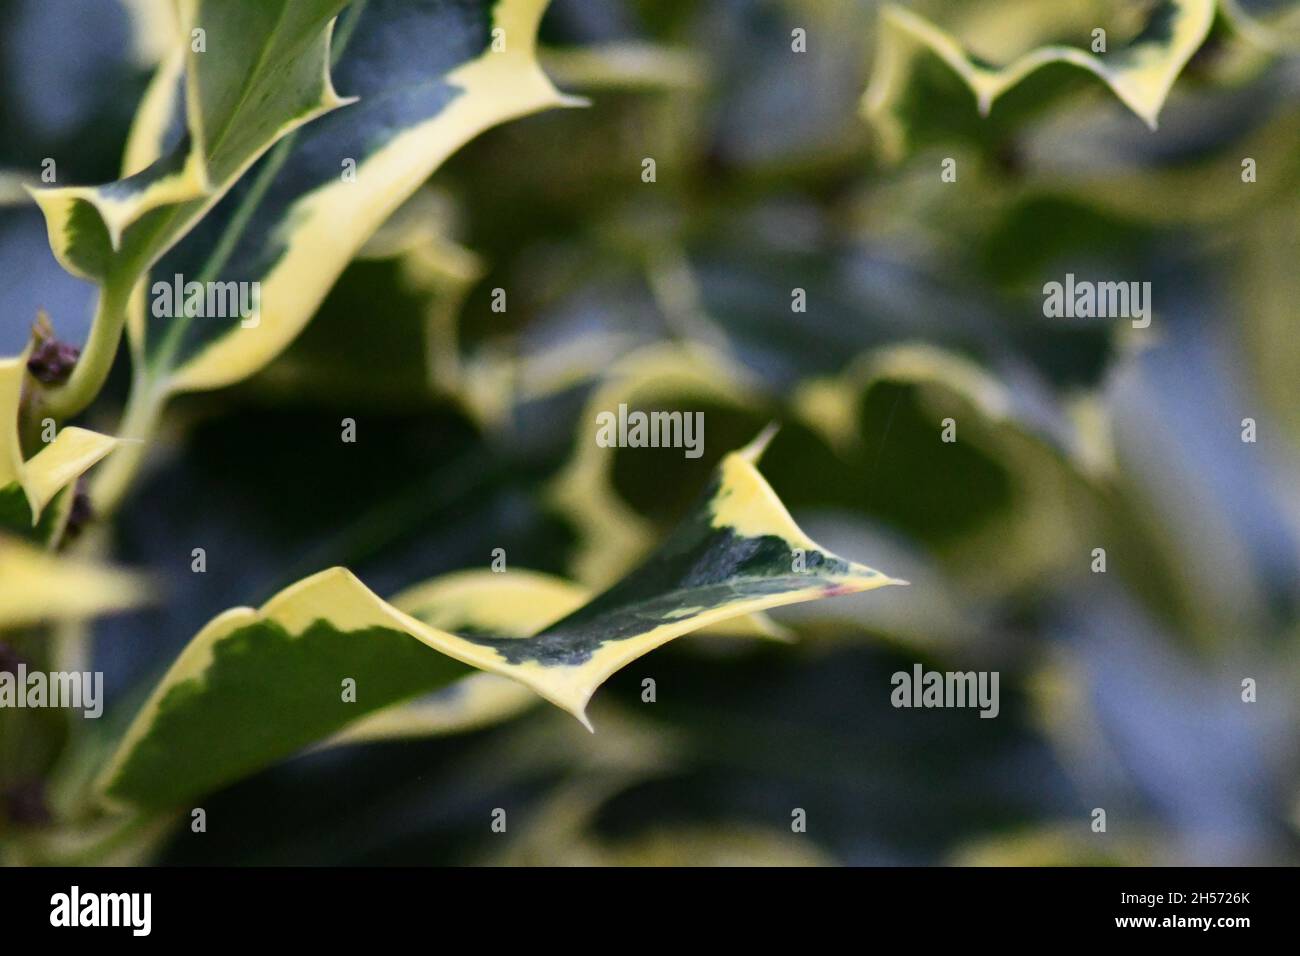 Ilex aquifolium 'Handsworth New Silver' Holly, close up of a branch with a dark background Stock Photo